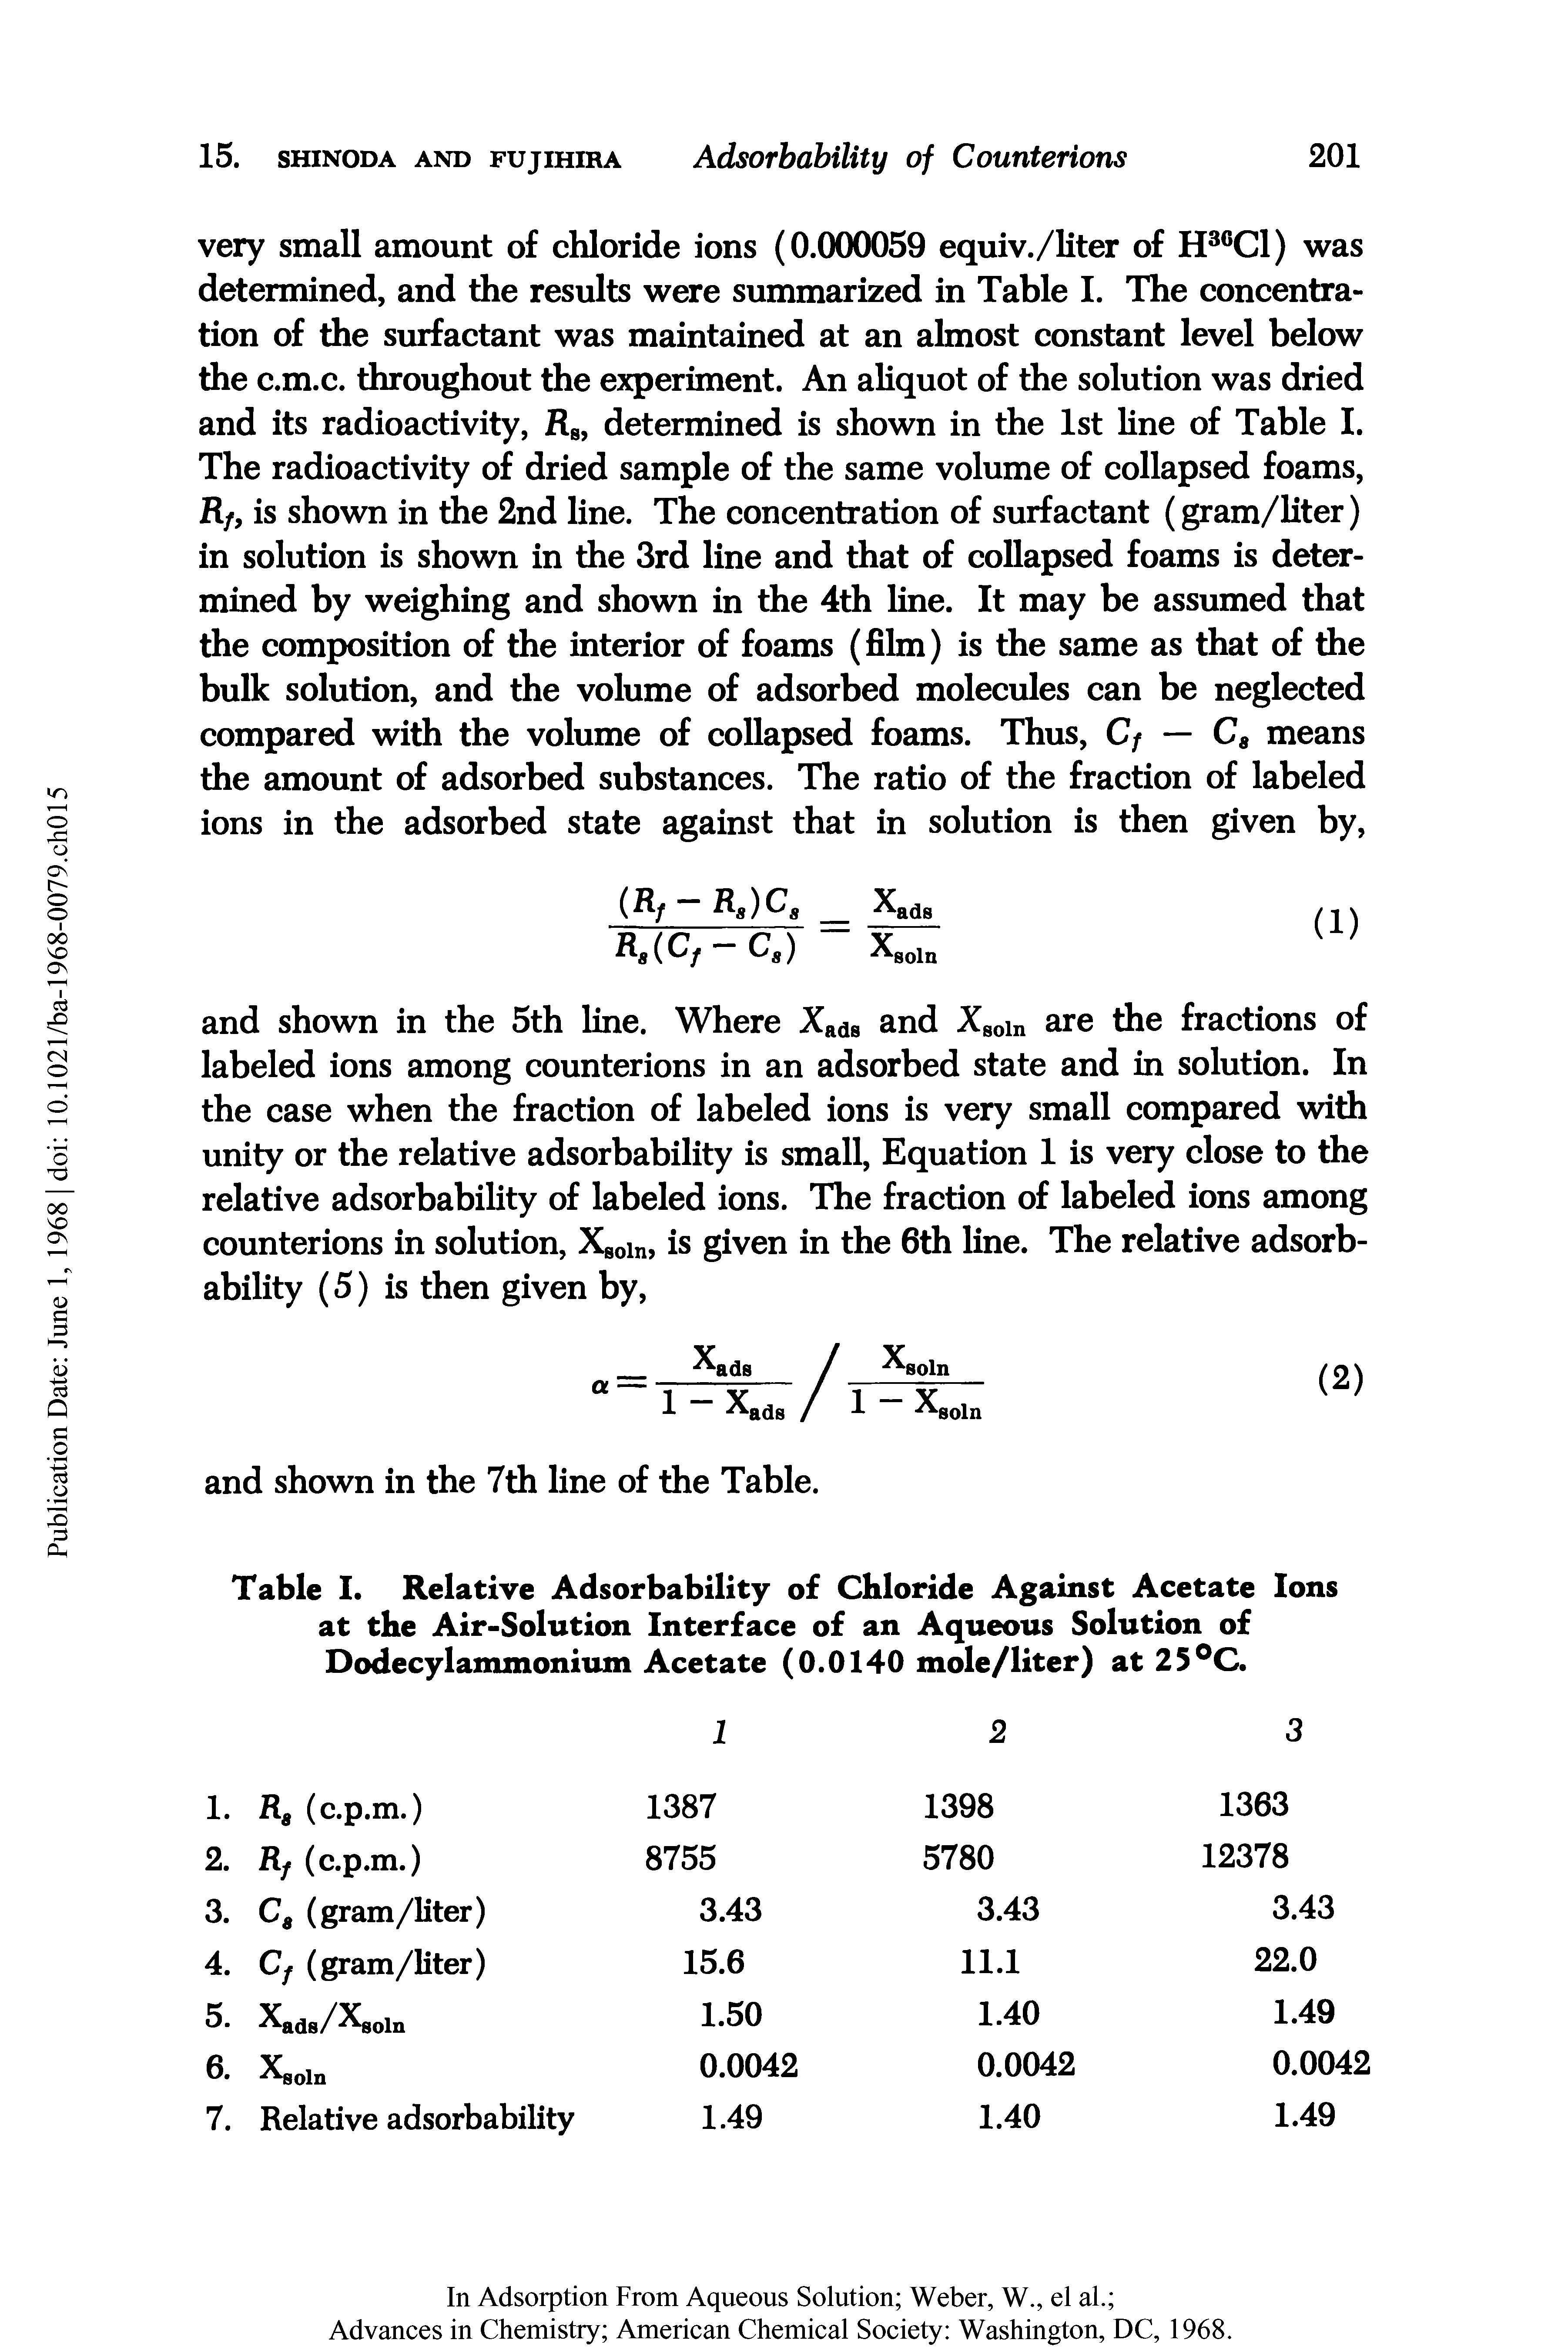 Table I. Relative Adsorbability of Chloride Against Acetate Ions at the Air-Solution Interface of an Aqueous Solution of Dodecylammonium Acetate (0.0140 mole/liter) at 25°C.